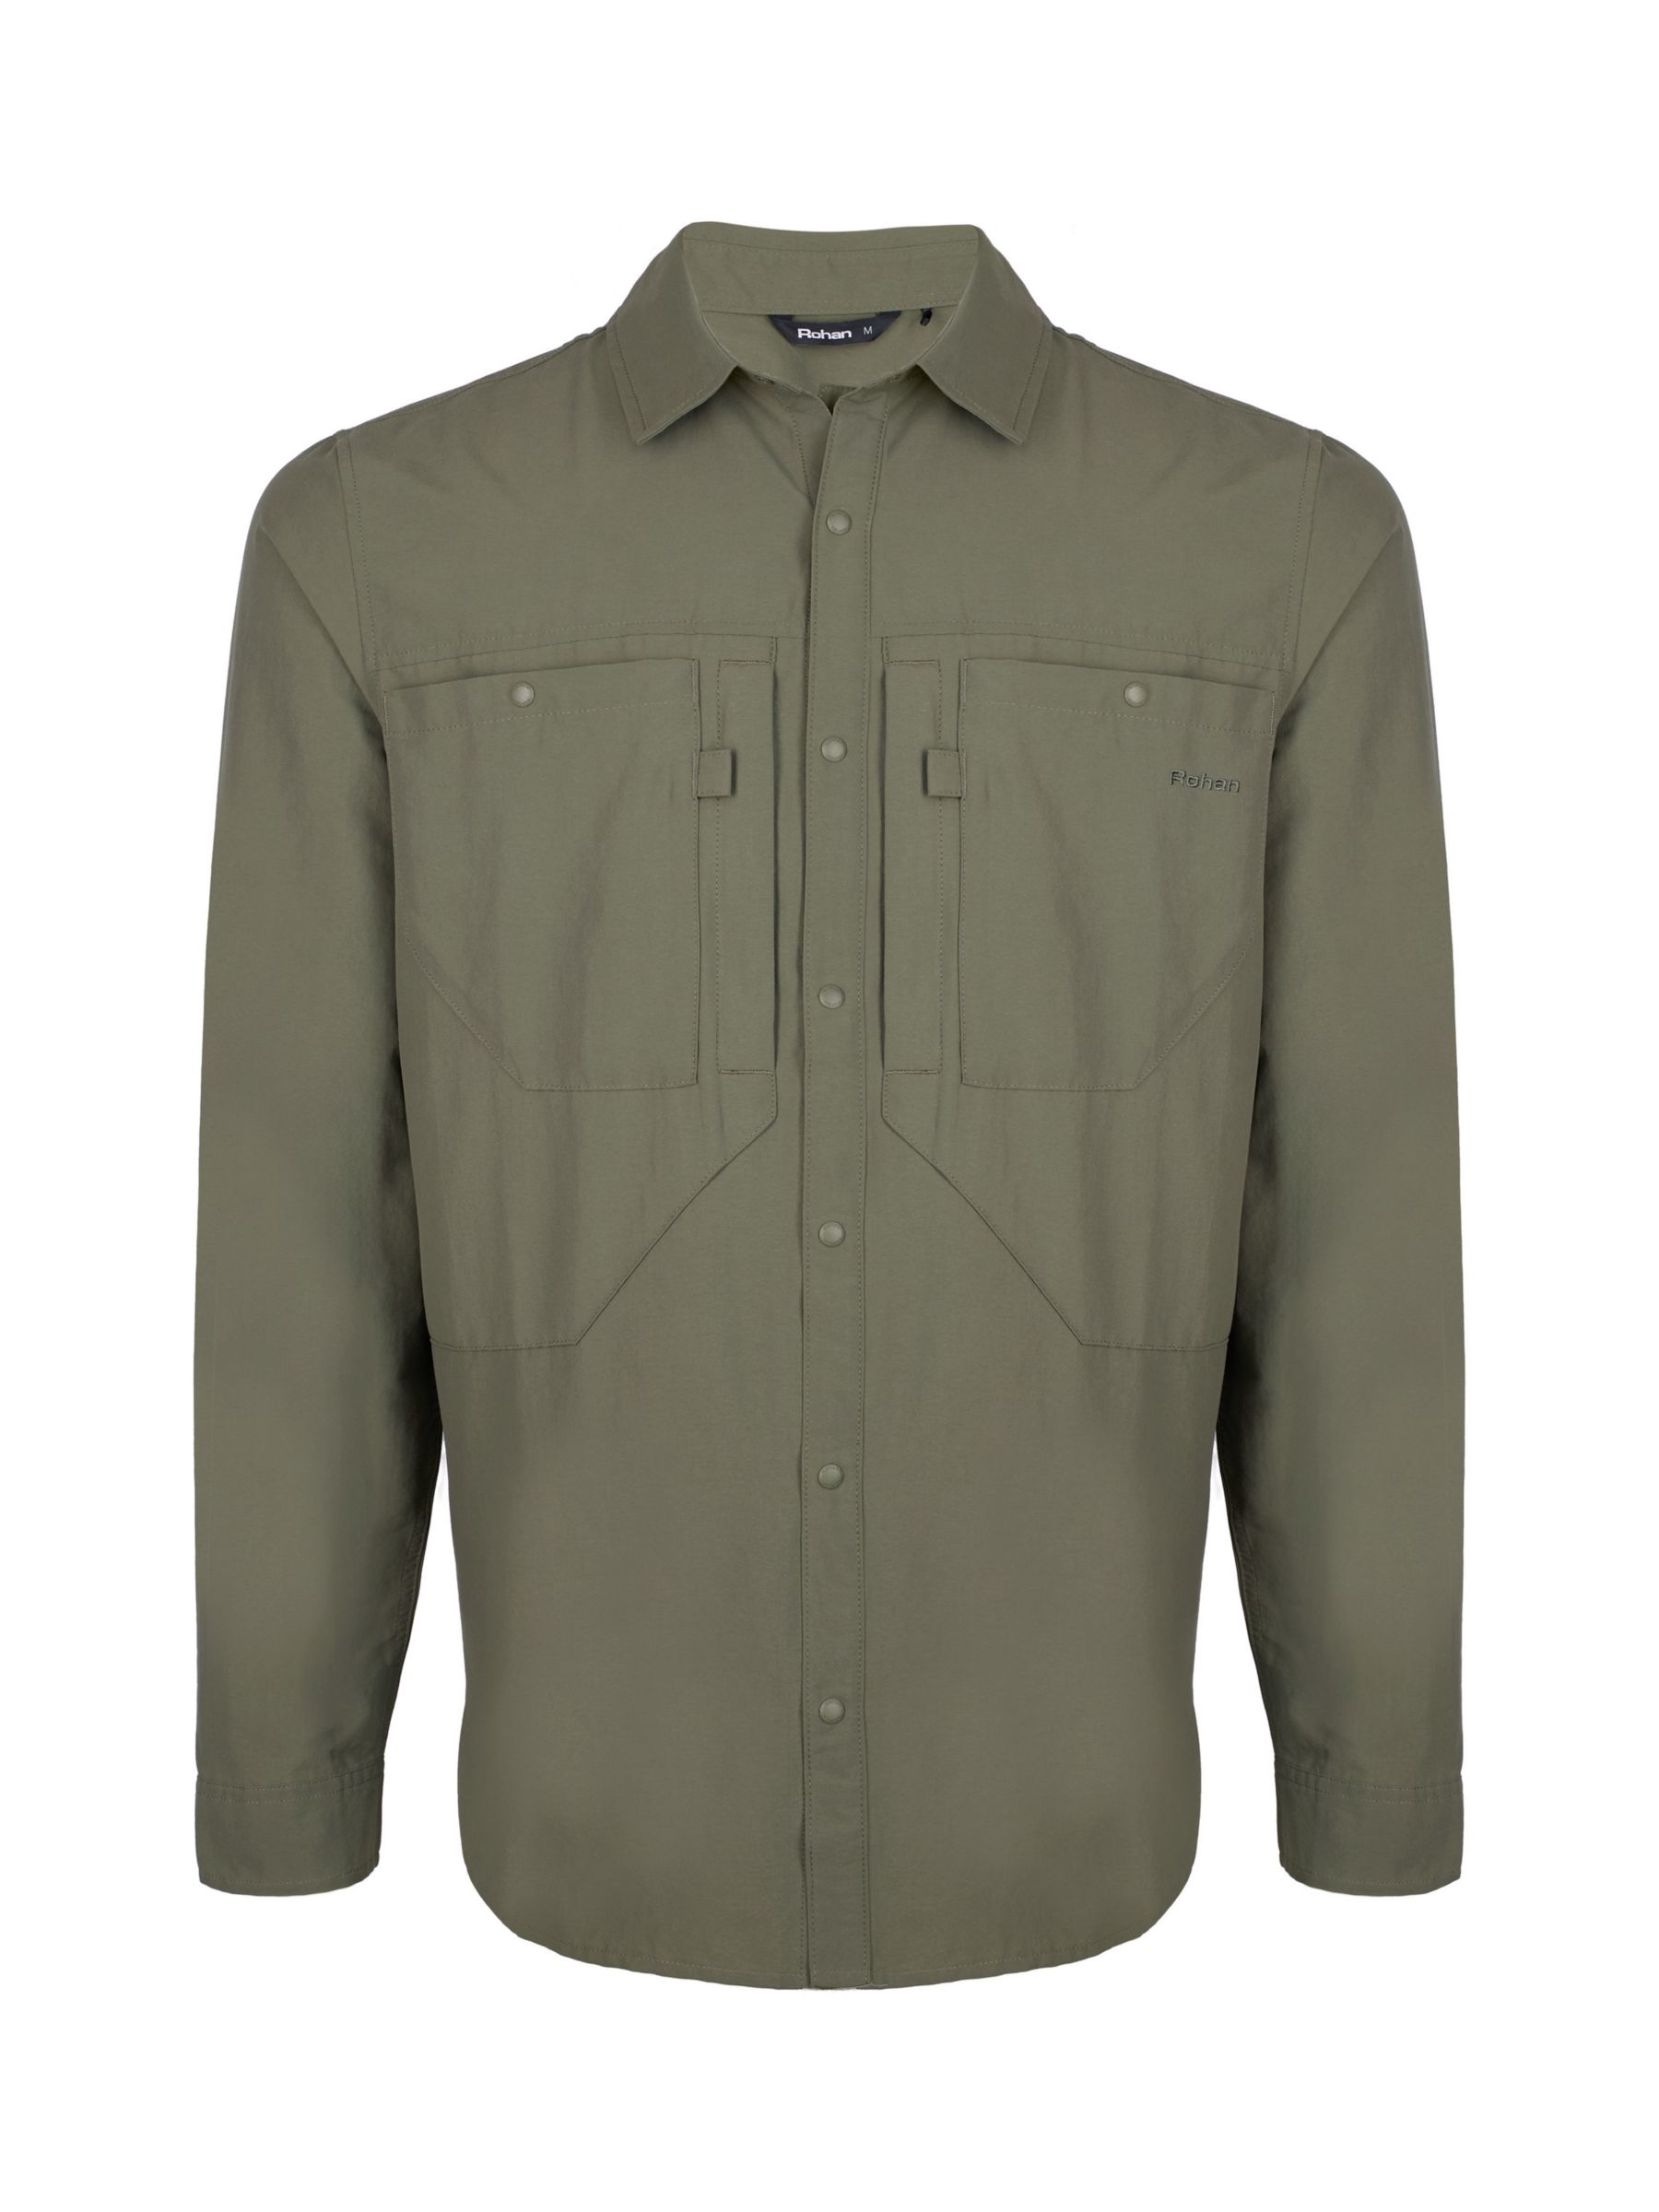 Buy Rohan Frontier Anti-Insect Long Sleeve Expedition Shirt, District Green Online at johnlewis.com